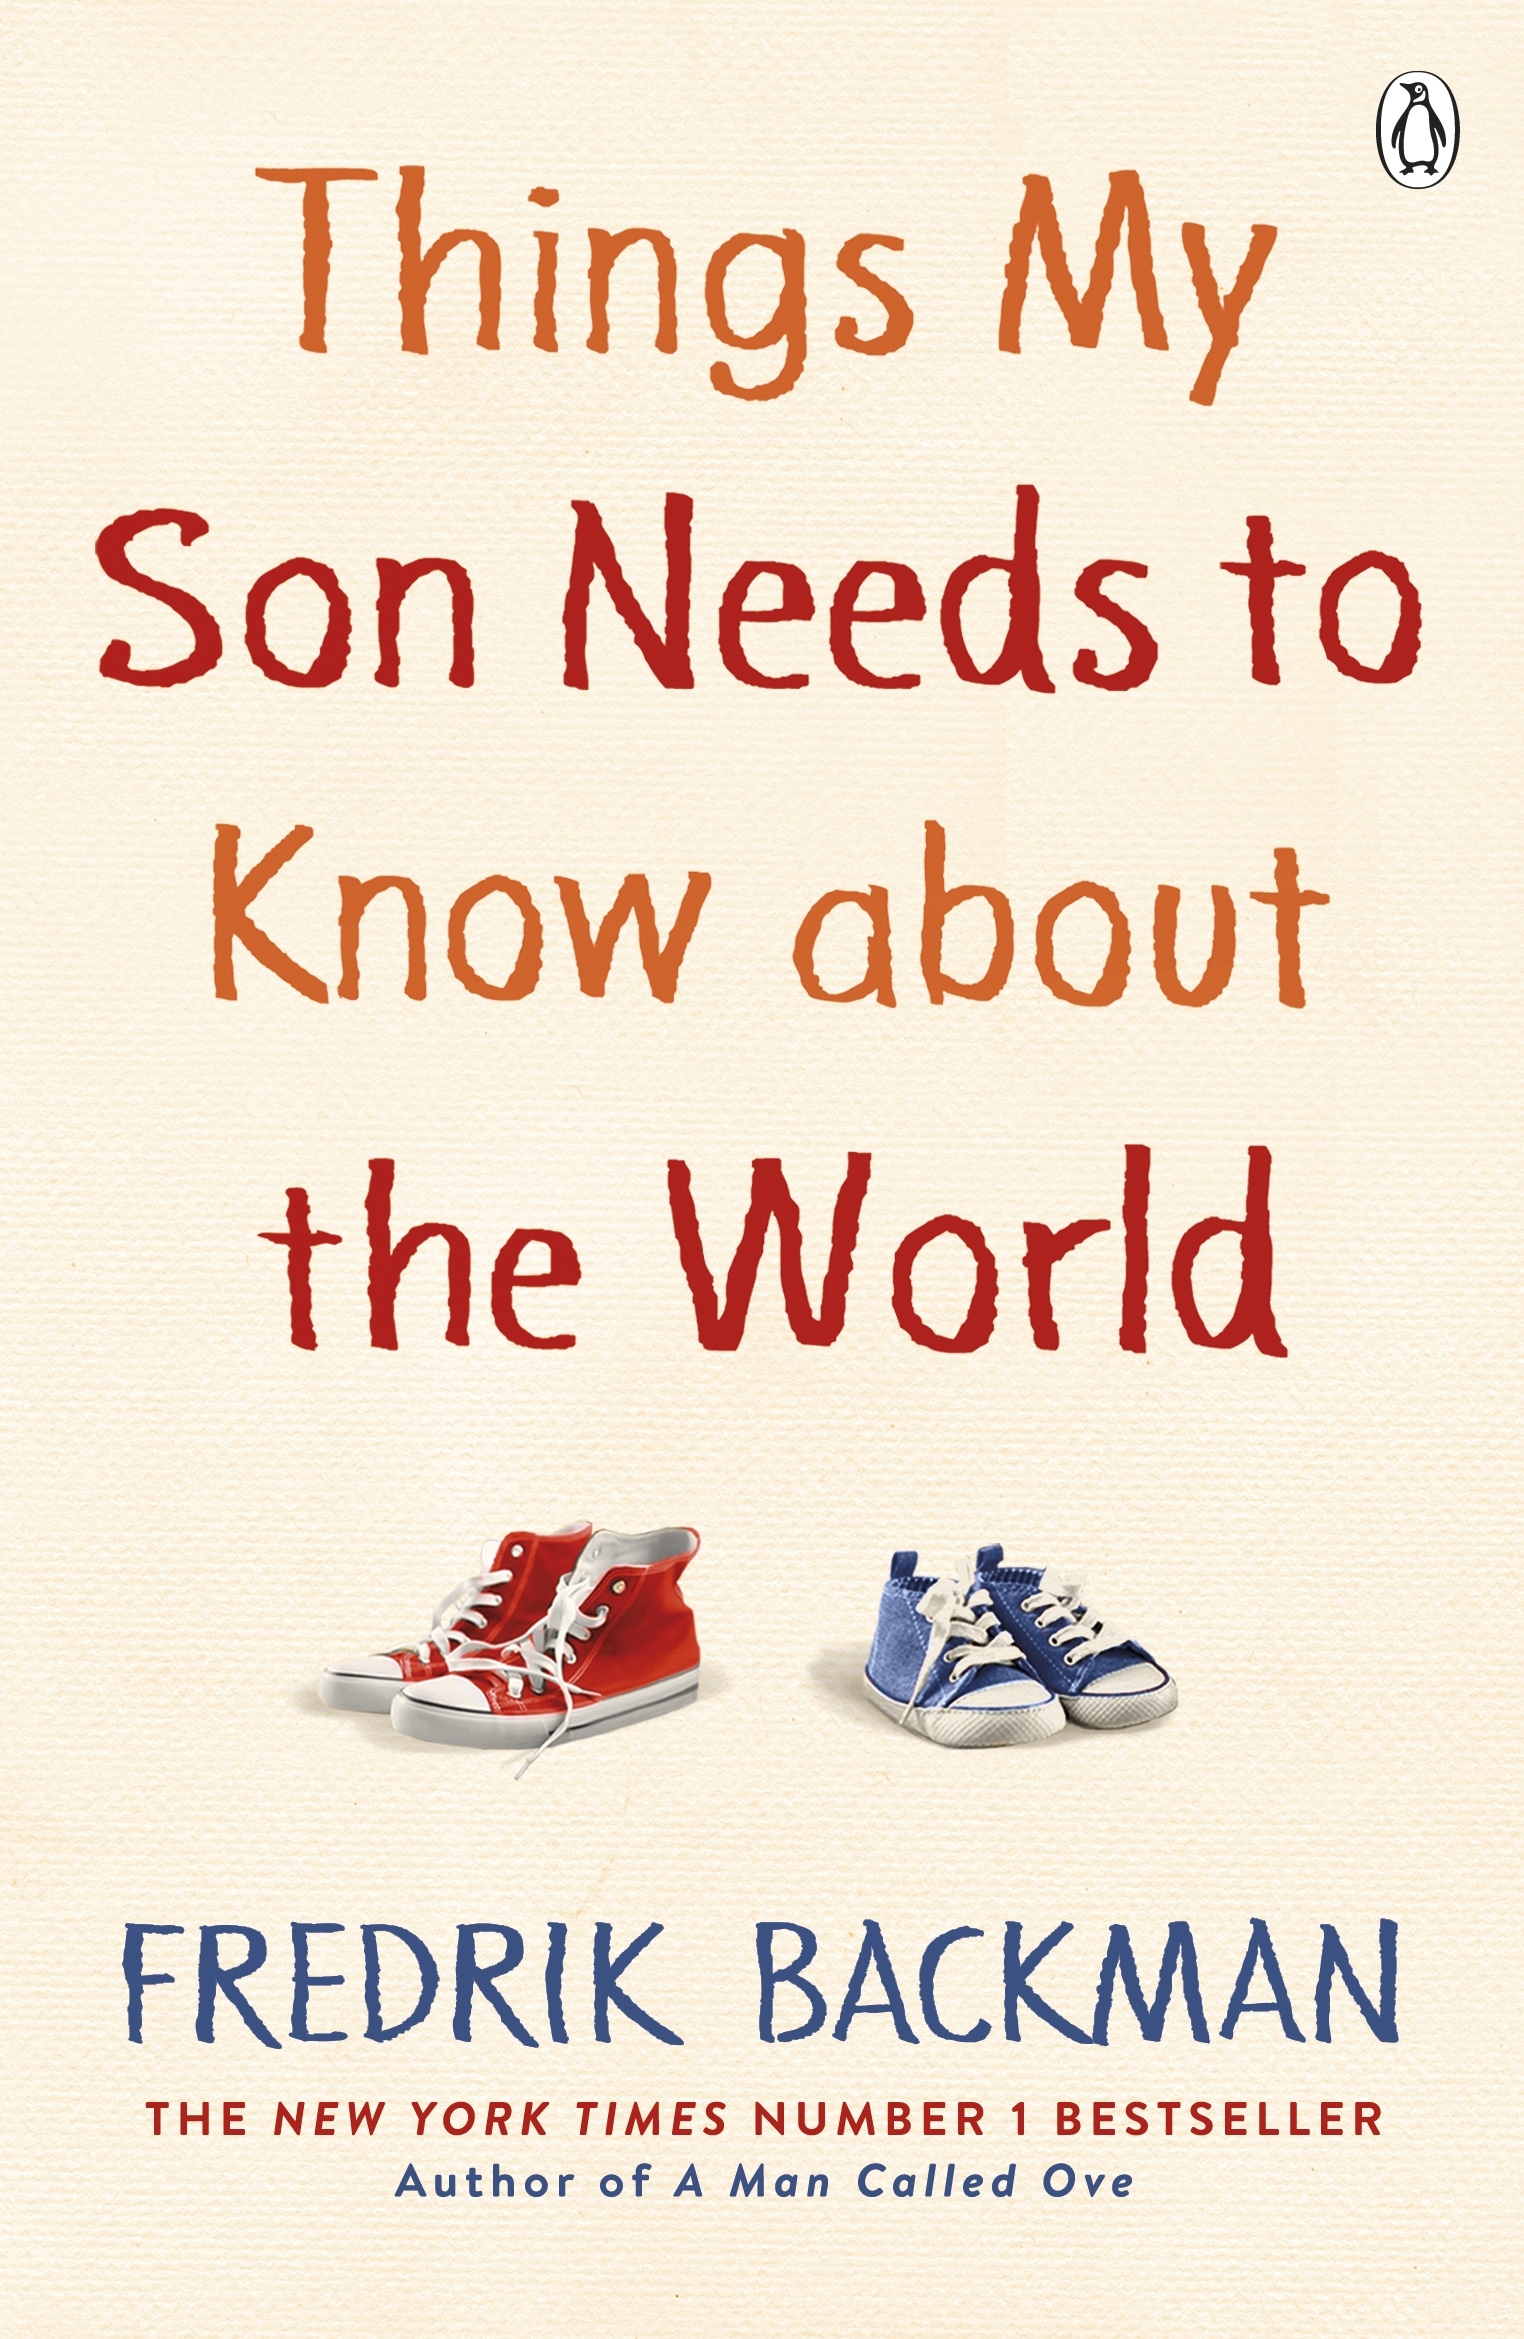 Book “Things My Son Needs to Know About The World” by Fredrik Backman — May 27, 2021